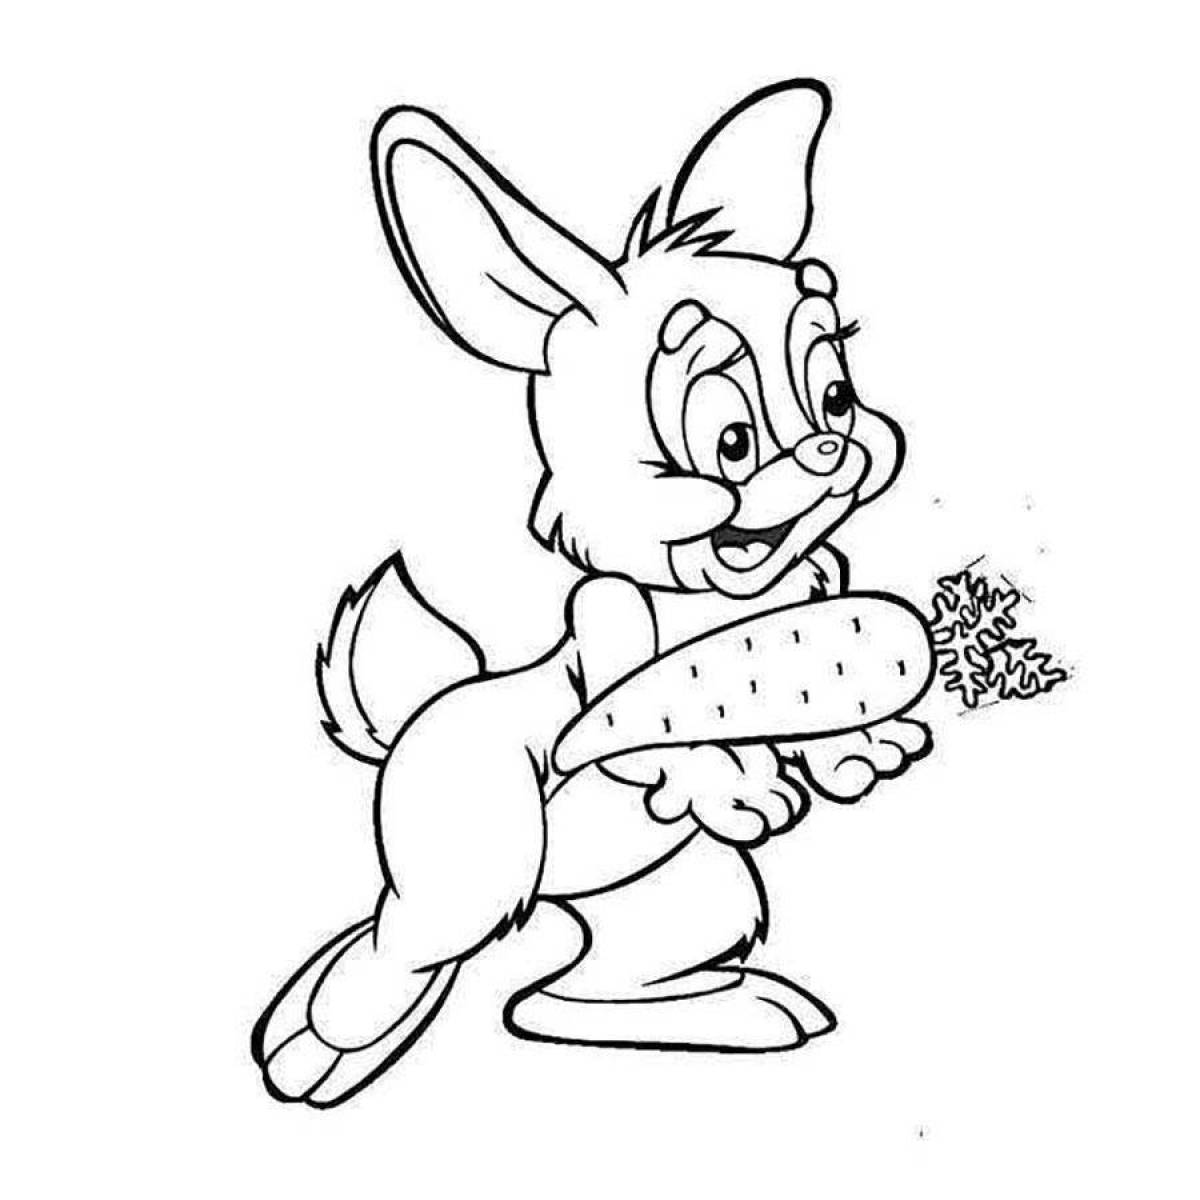 Zani rabbit with carrot coloring page